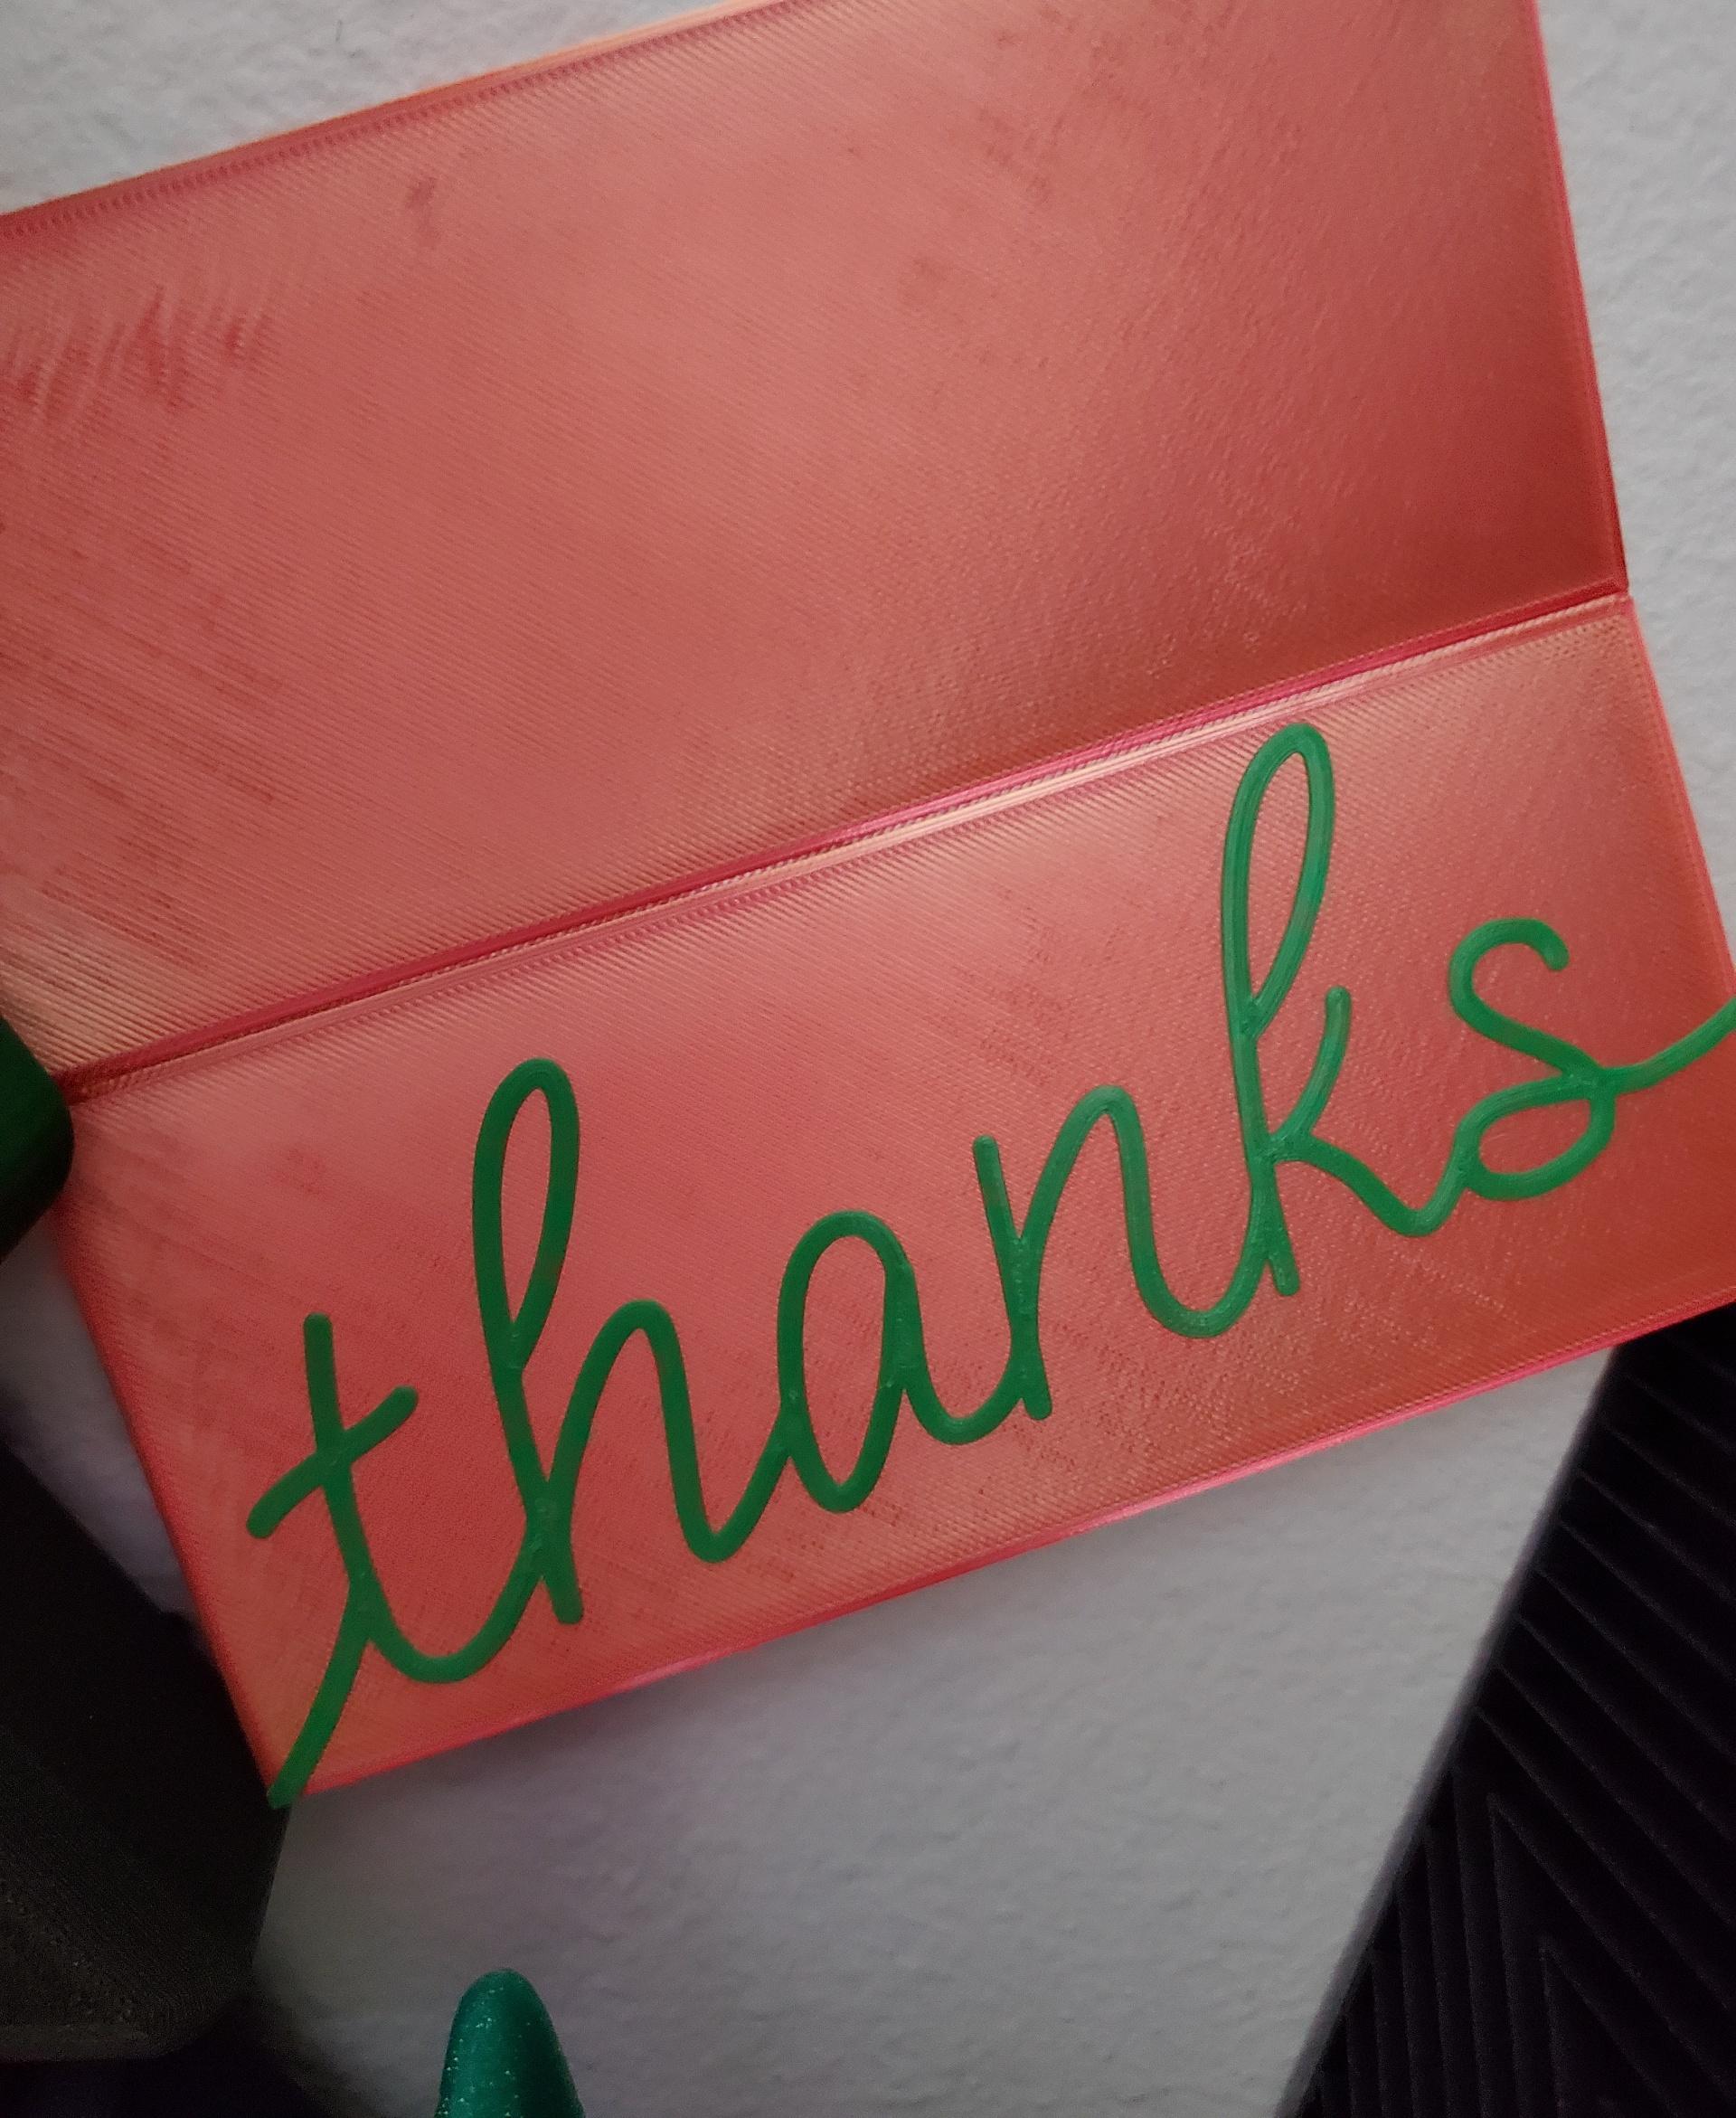 "thanks" Folded Card for Cash Gifts | Fits cash envelopes from the bank | Sized for US bank notes 3d model